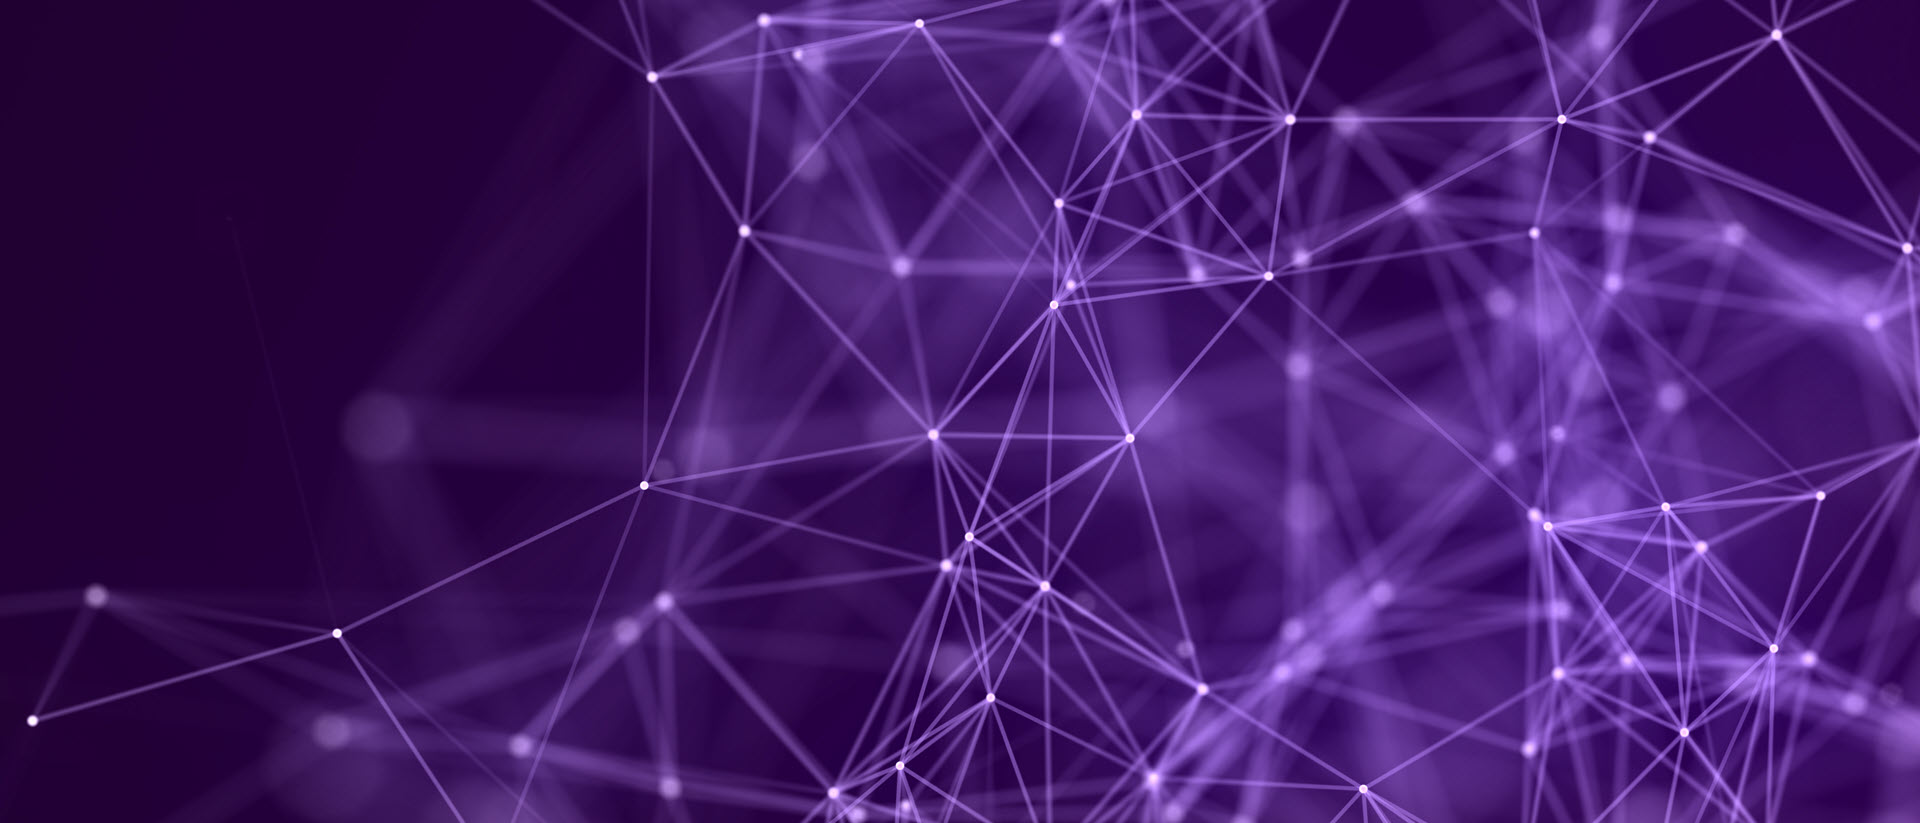 Image of data nodes connected in a virtual environment on purple background.